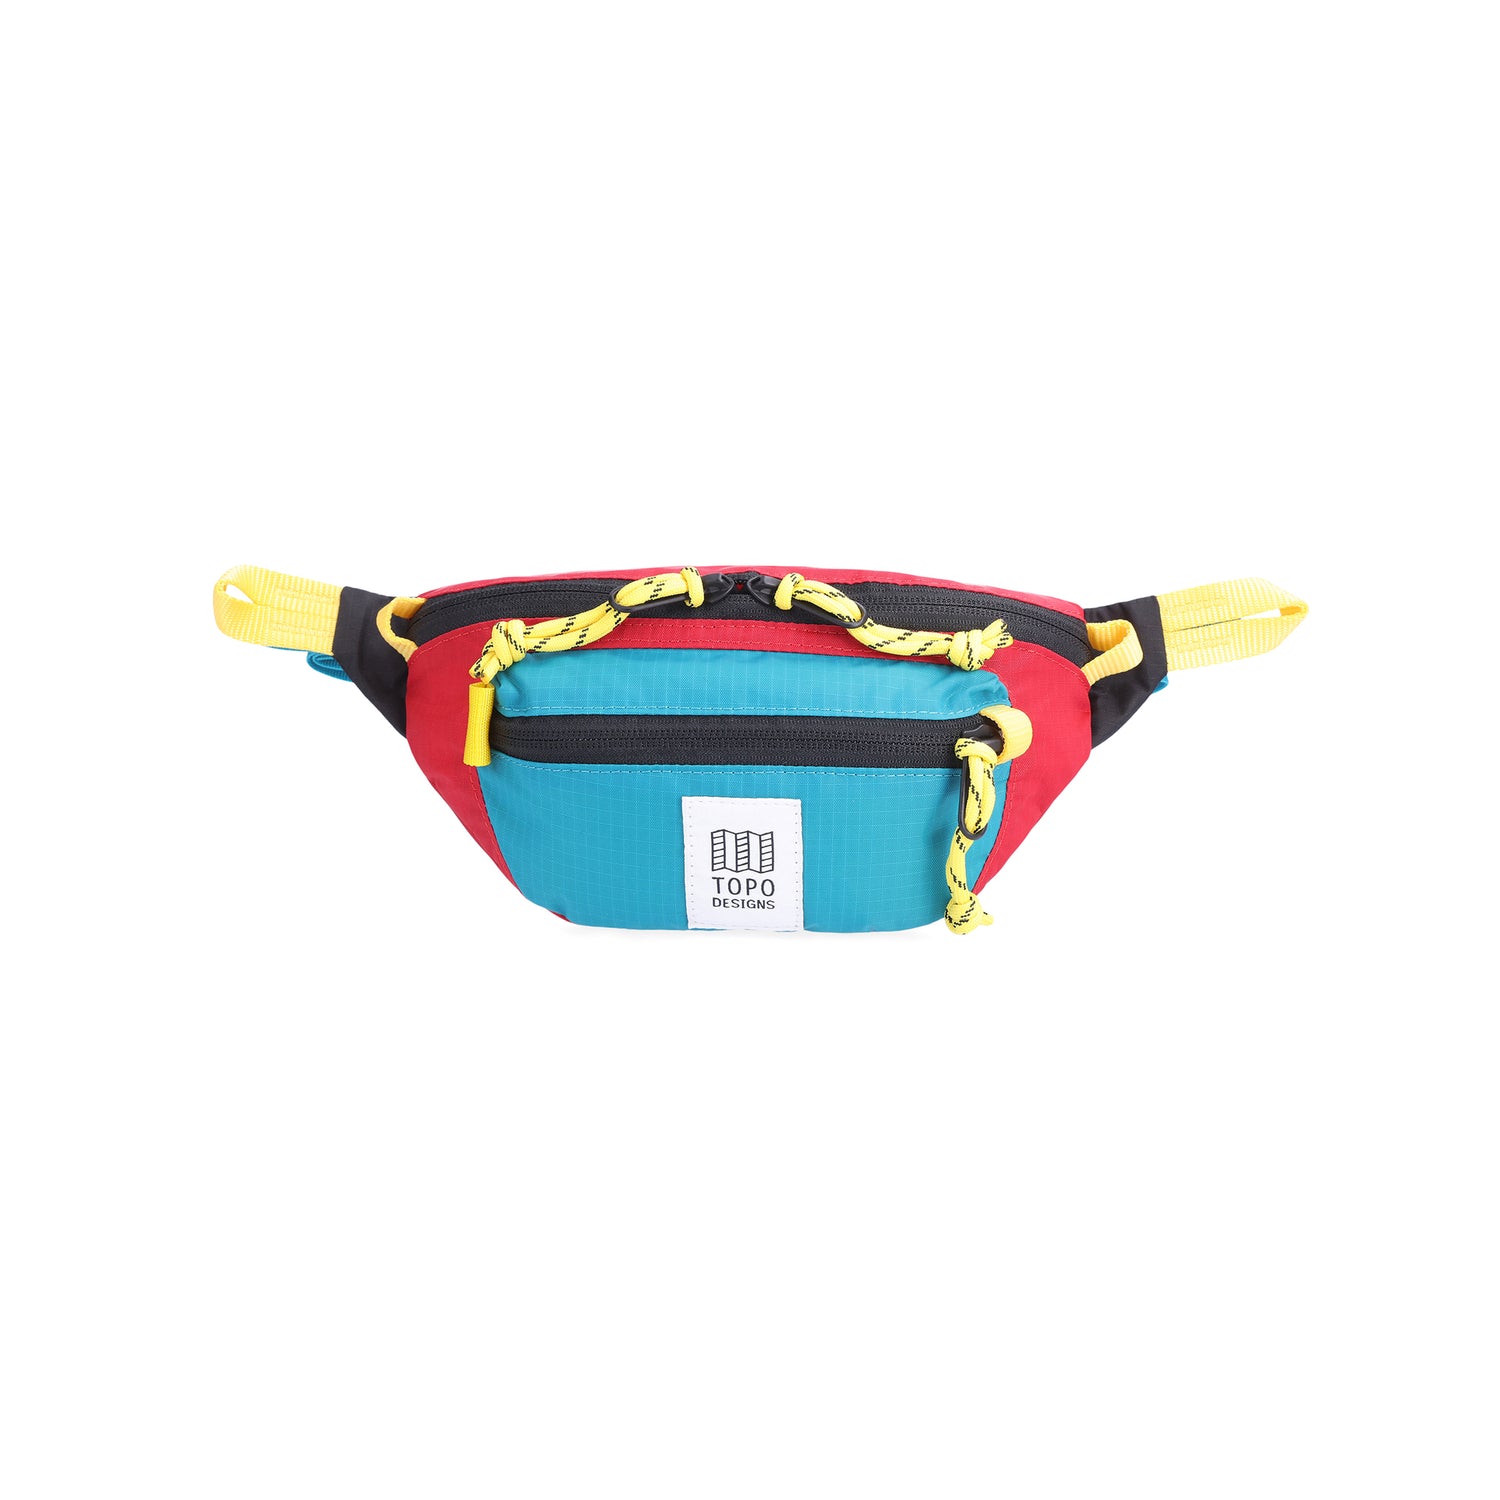 Topo Designs Mountain Waist Pack - Red/Turquoise